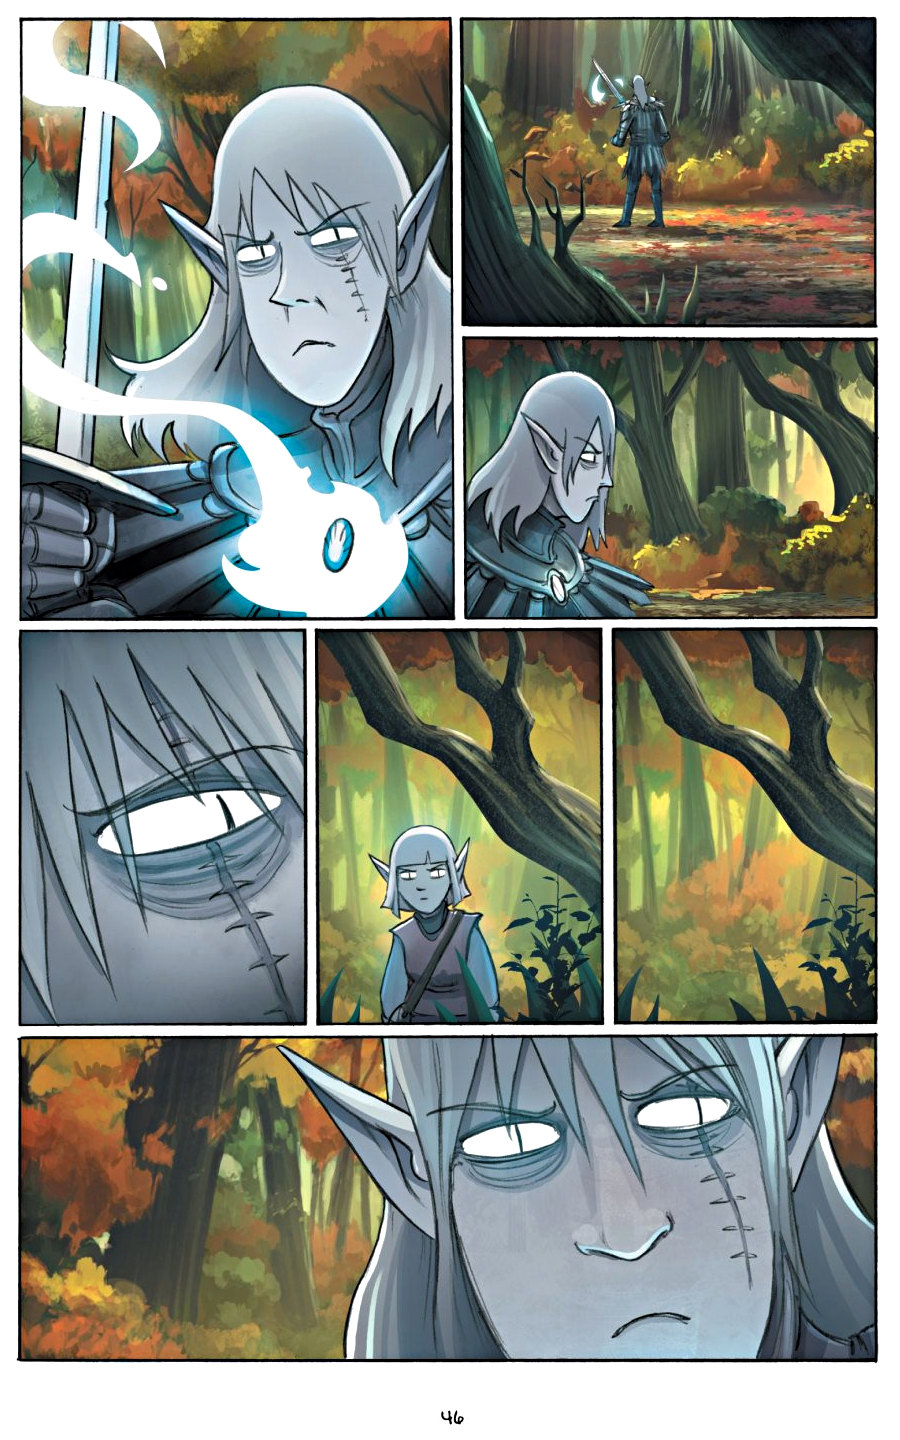 page 46 of amulet 5 prince of the elves graphic novel